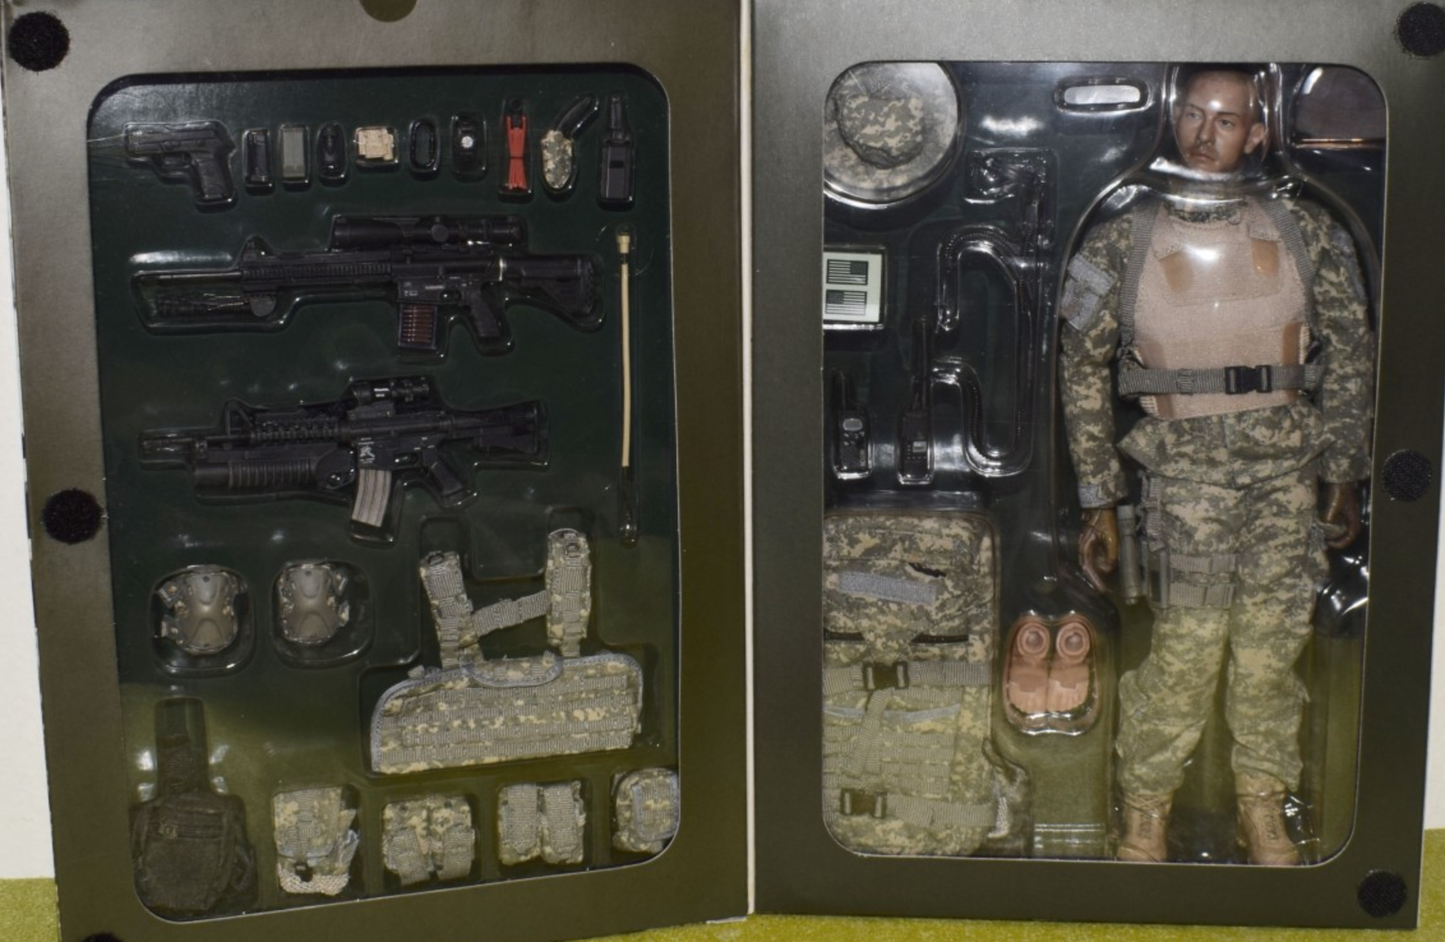 Hot Toys 1/6 12" U.S. Army Sniper Special Force Action Figure